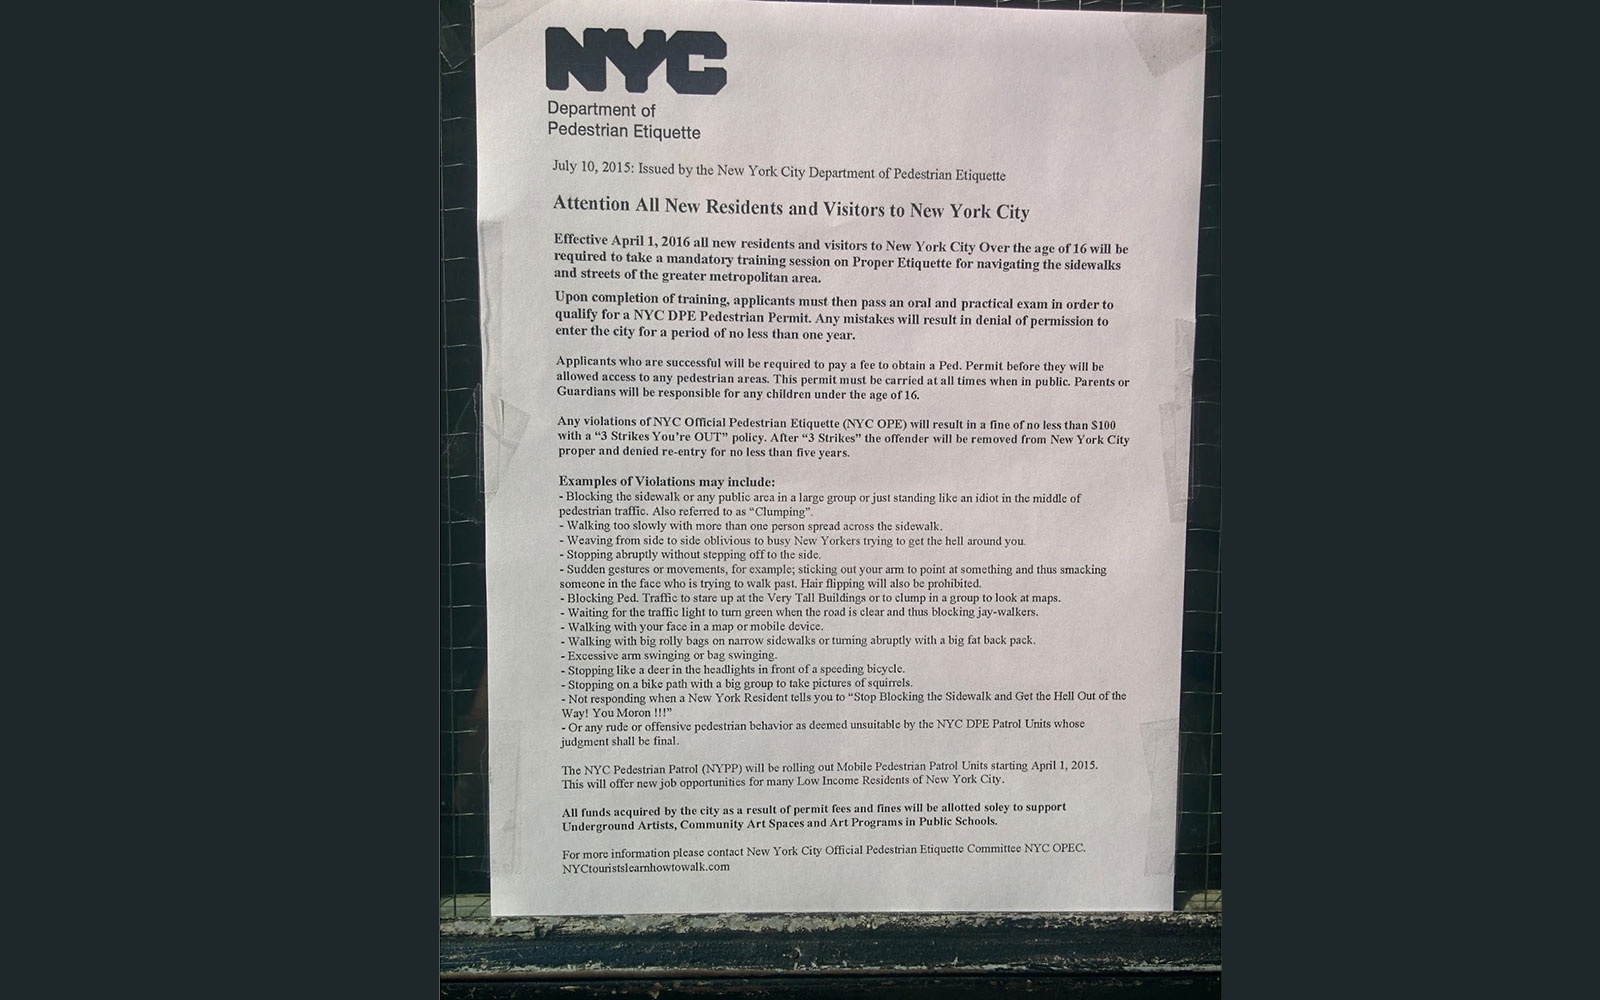 Walking Lessons for Tourists, From NYC’s 'Department of Pedestrian Etiquette'